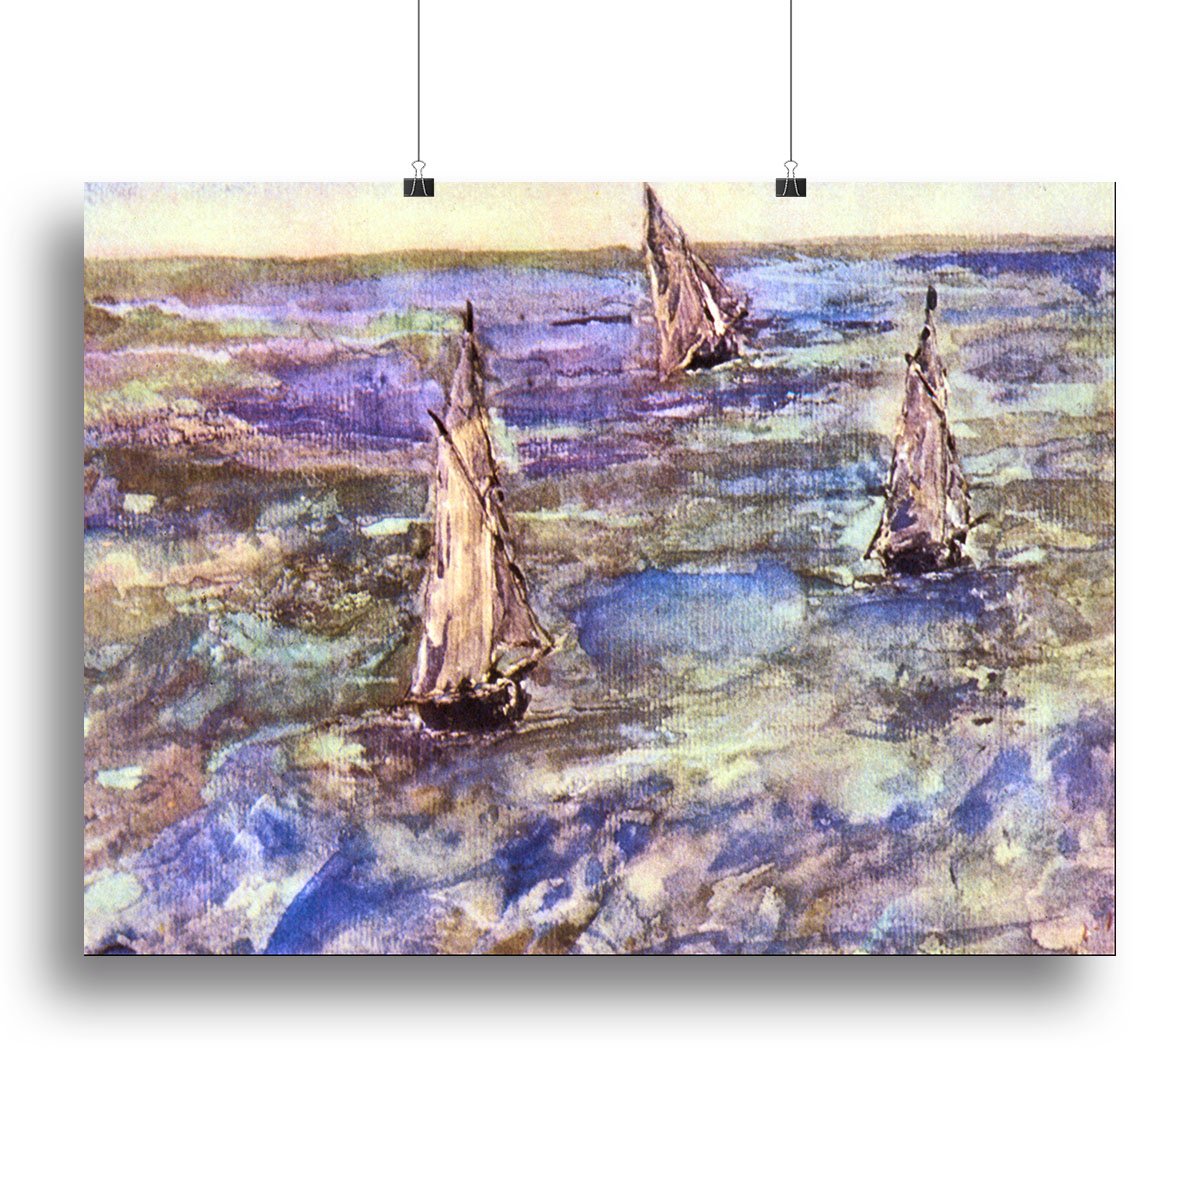 Seascape 1873 by Manet Canvas Print or Poster